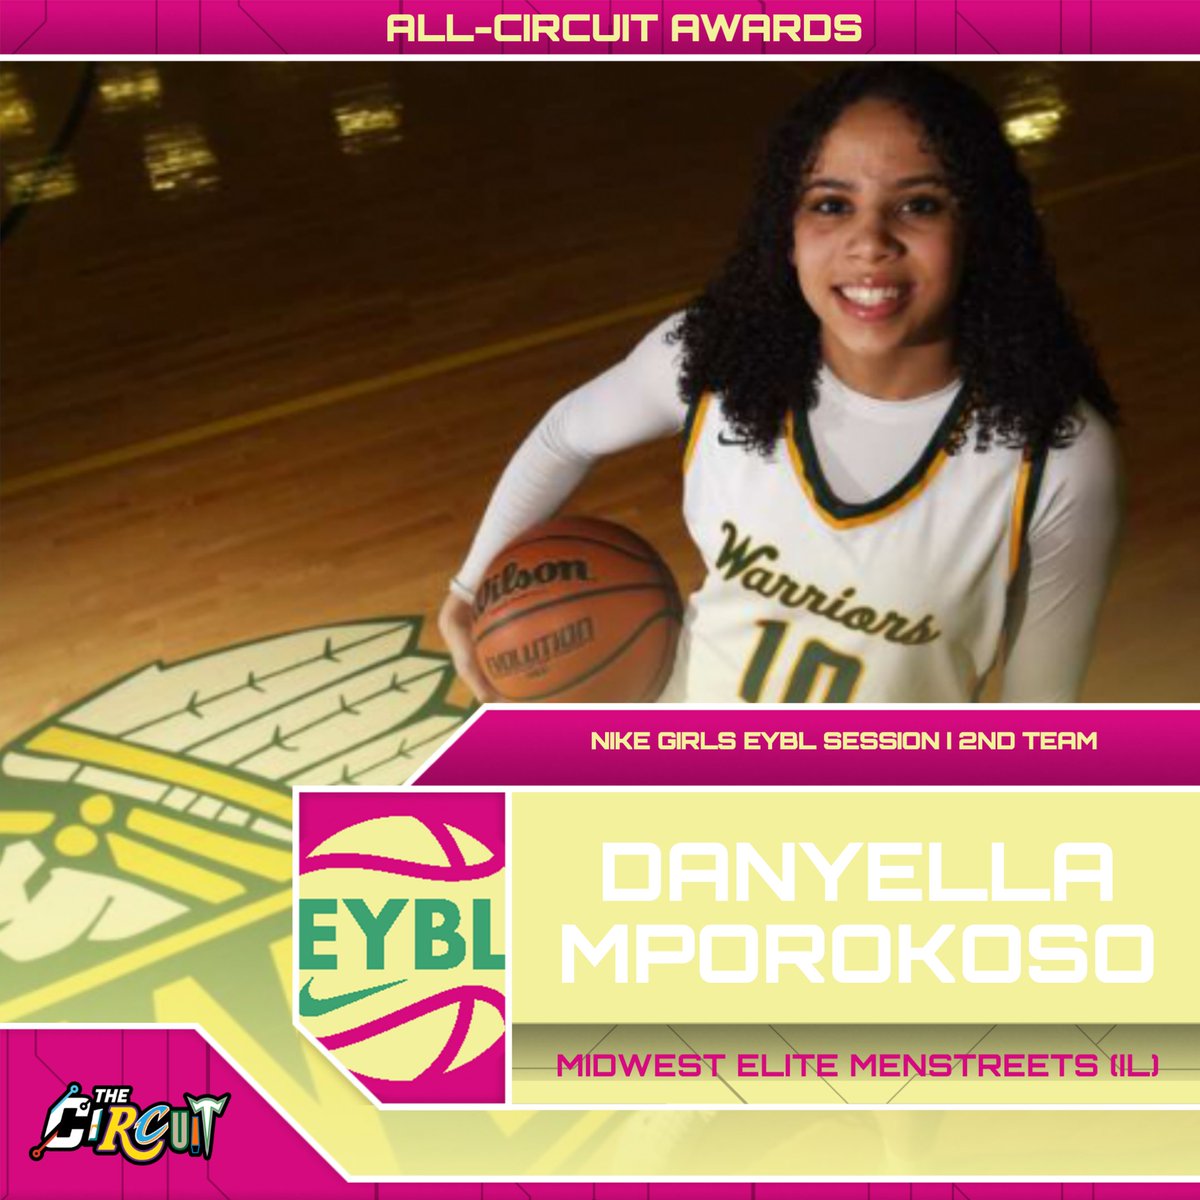 Nike EYBL Hampton | 2md Team 🥈 Danyella Mporokoso | Midwest Elite MenStreets (IL) | 2026 Averages ➡️ 15.0 PPG, 5.4 RPG, 1.8 APG All-Circuit Awards ⤵️ thecircuithoops.com/news_article/s…